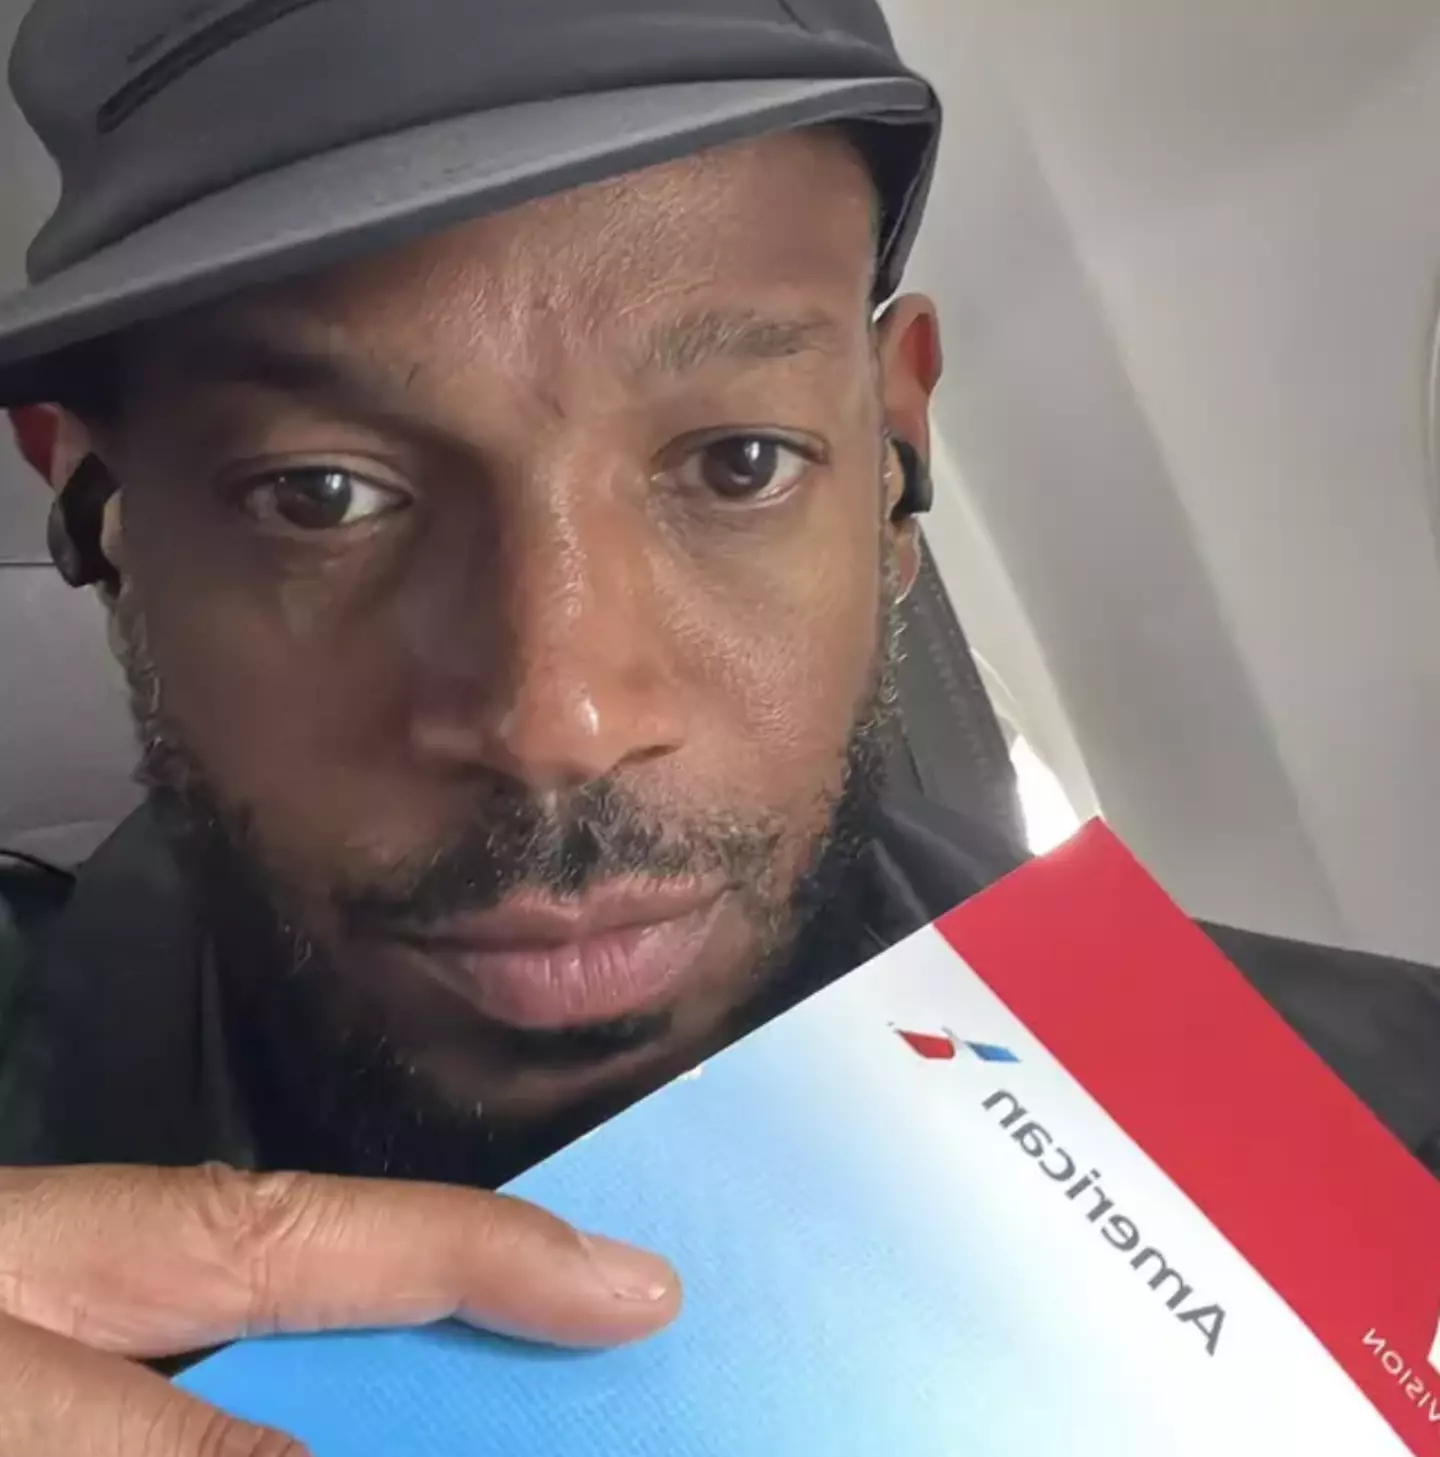 Wayans was able to complete his journey on an American Airlines flight.